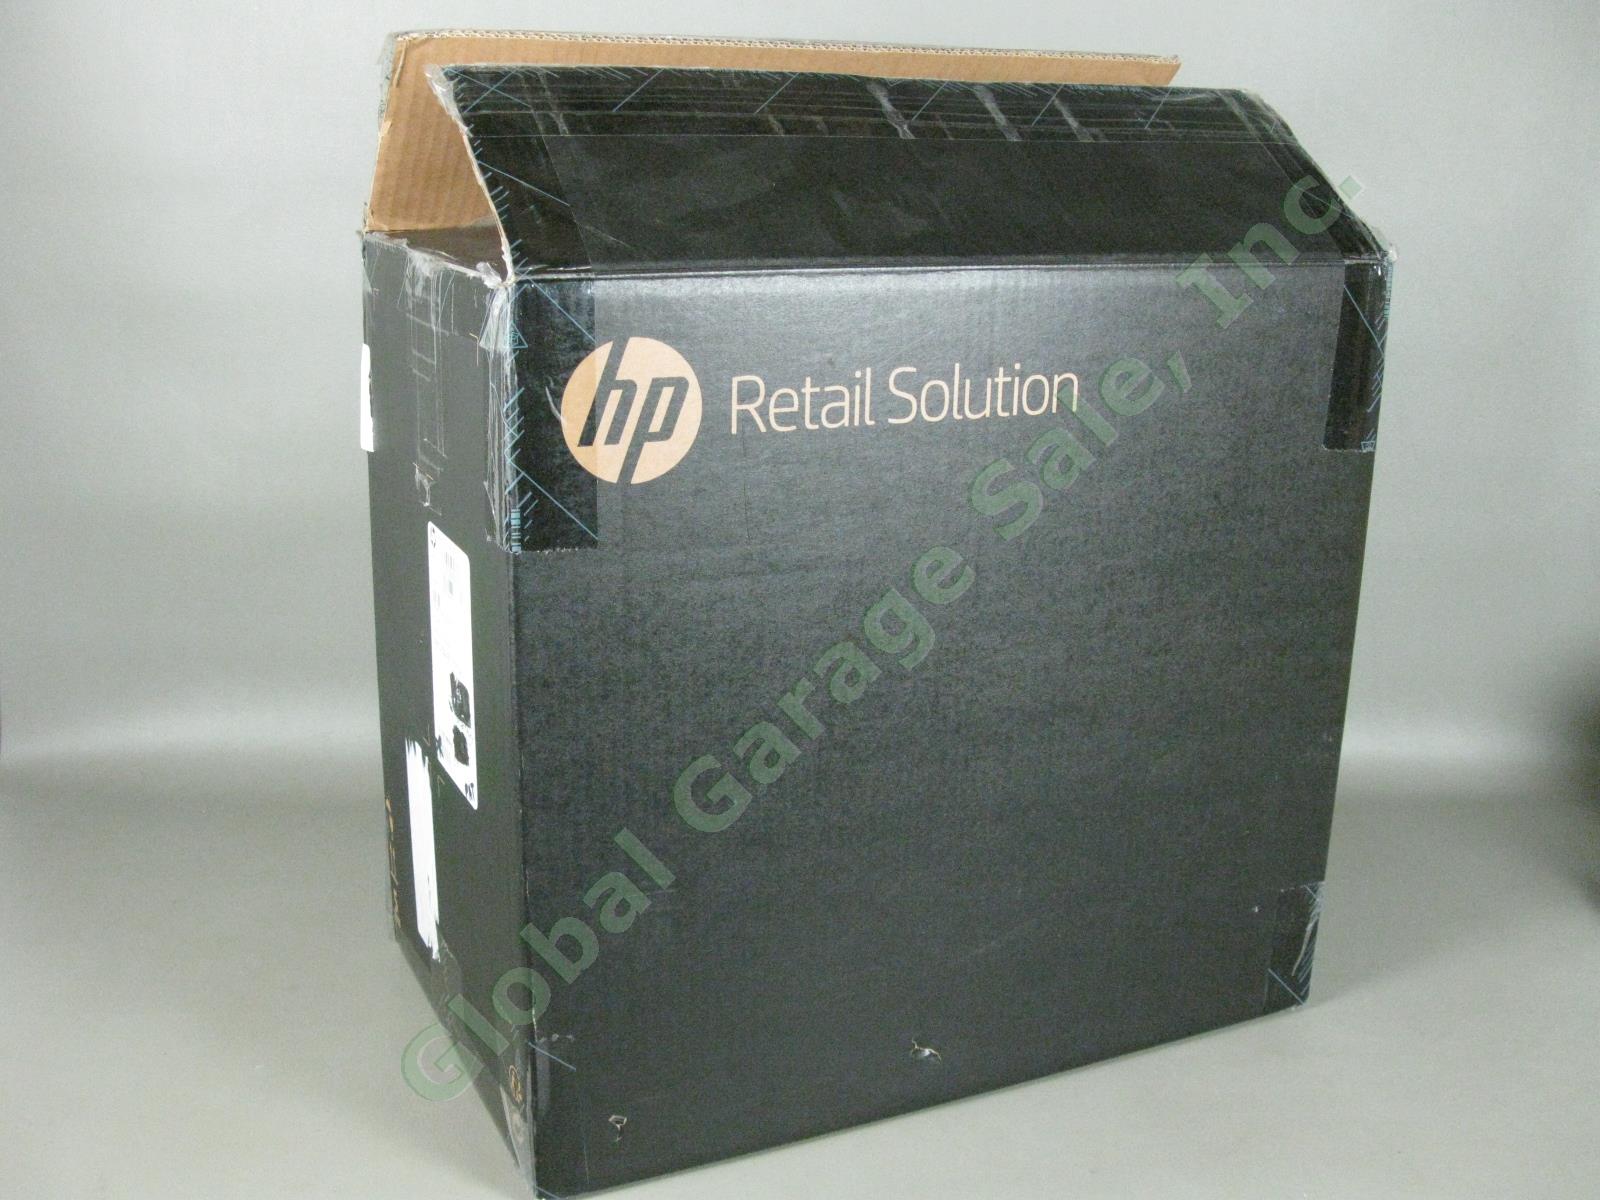 HP Engage All In One POS Retail System 4QE97US 2-Advanced I/O Bases Near Mint! 10